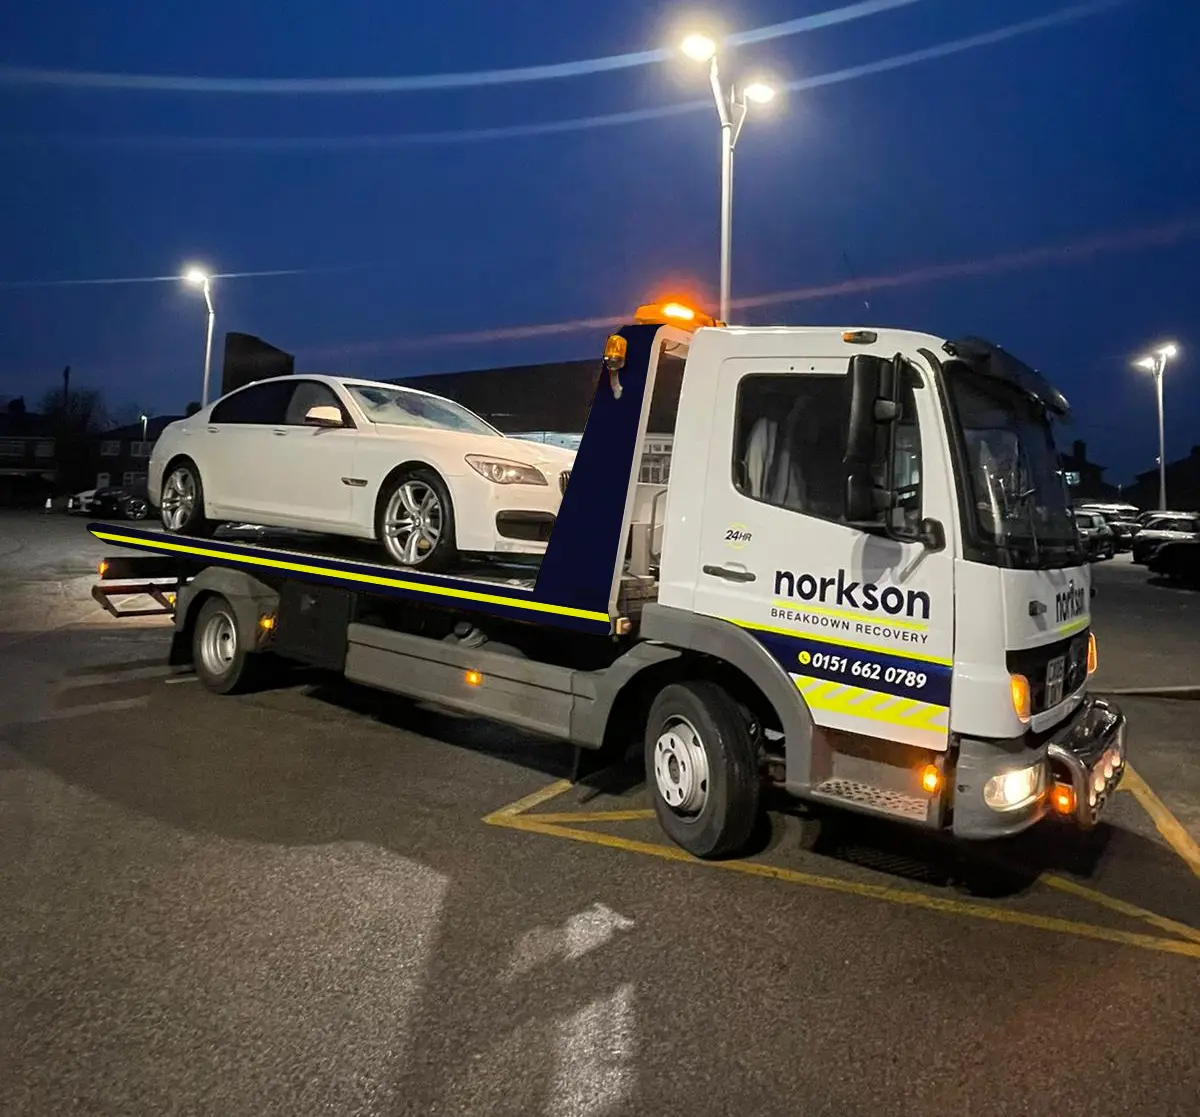 Norkson Breakdown Recovery & Car Recovery Liverpool Services